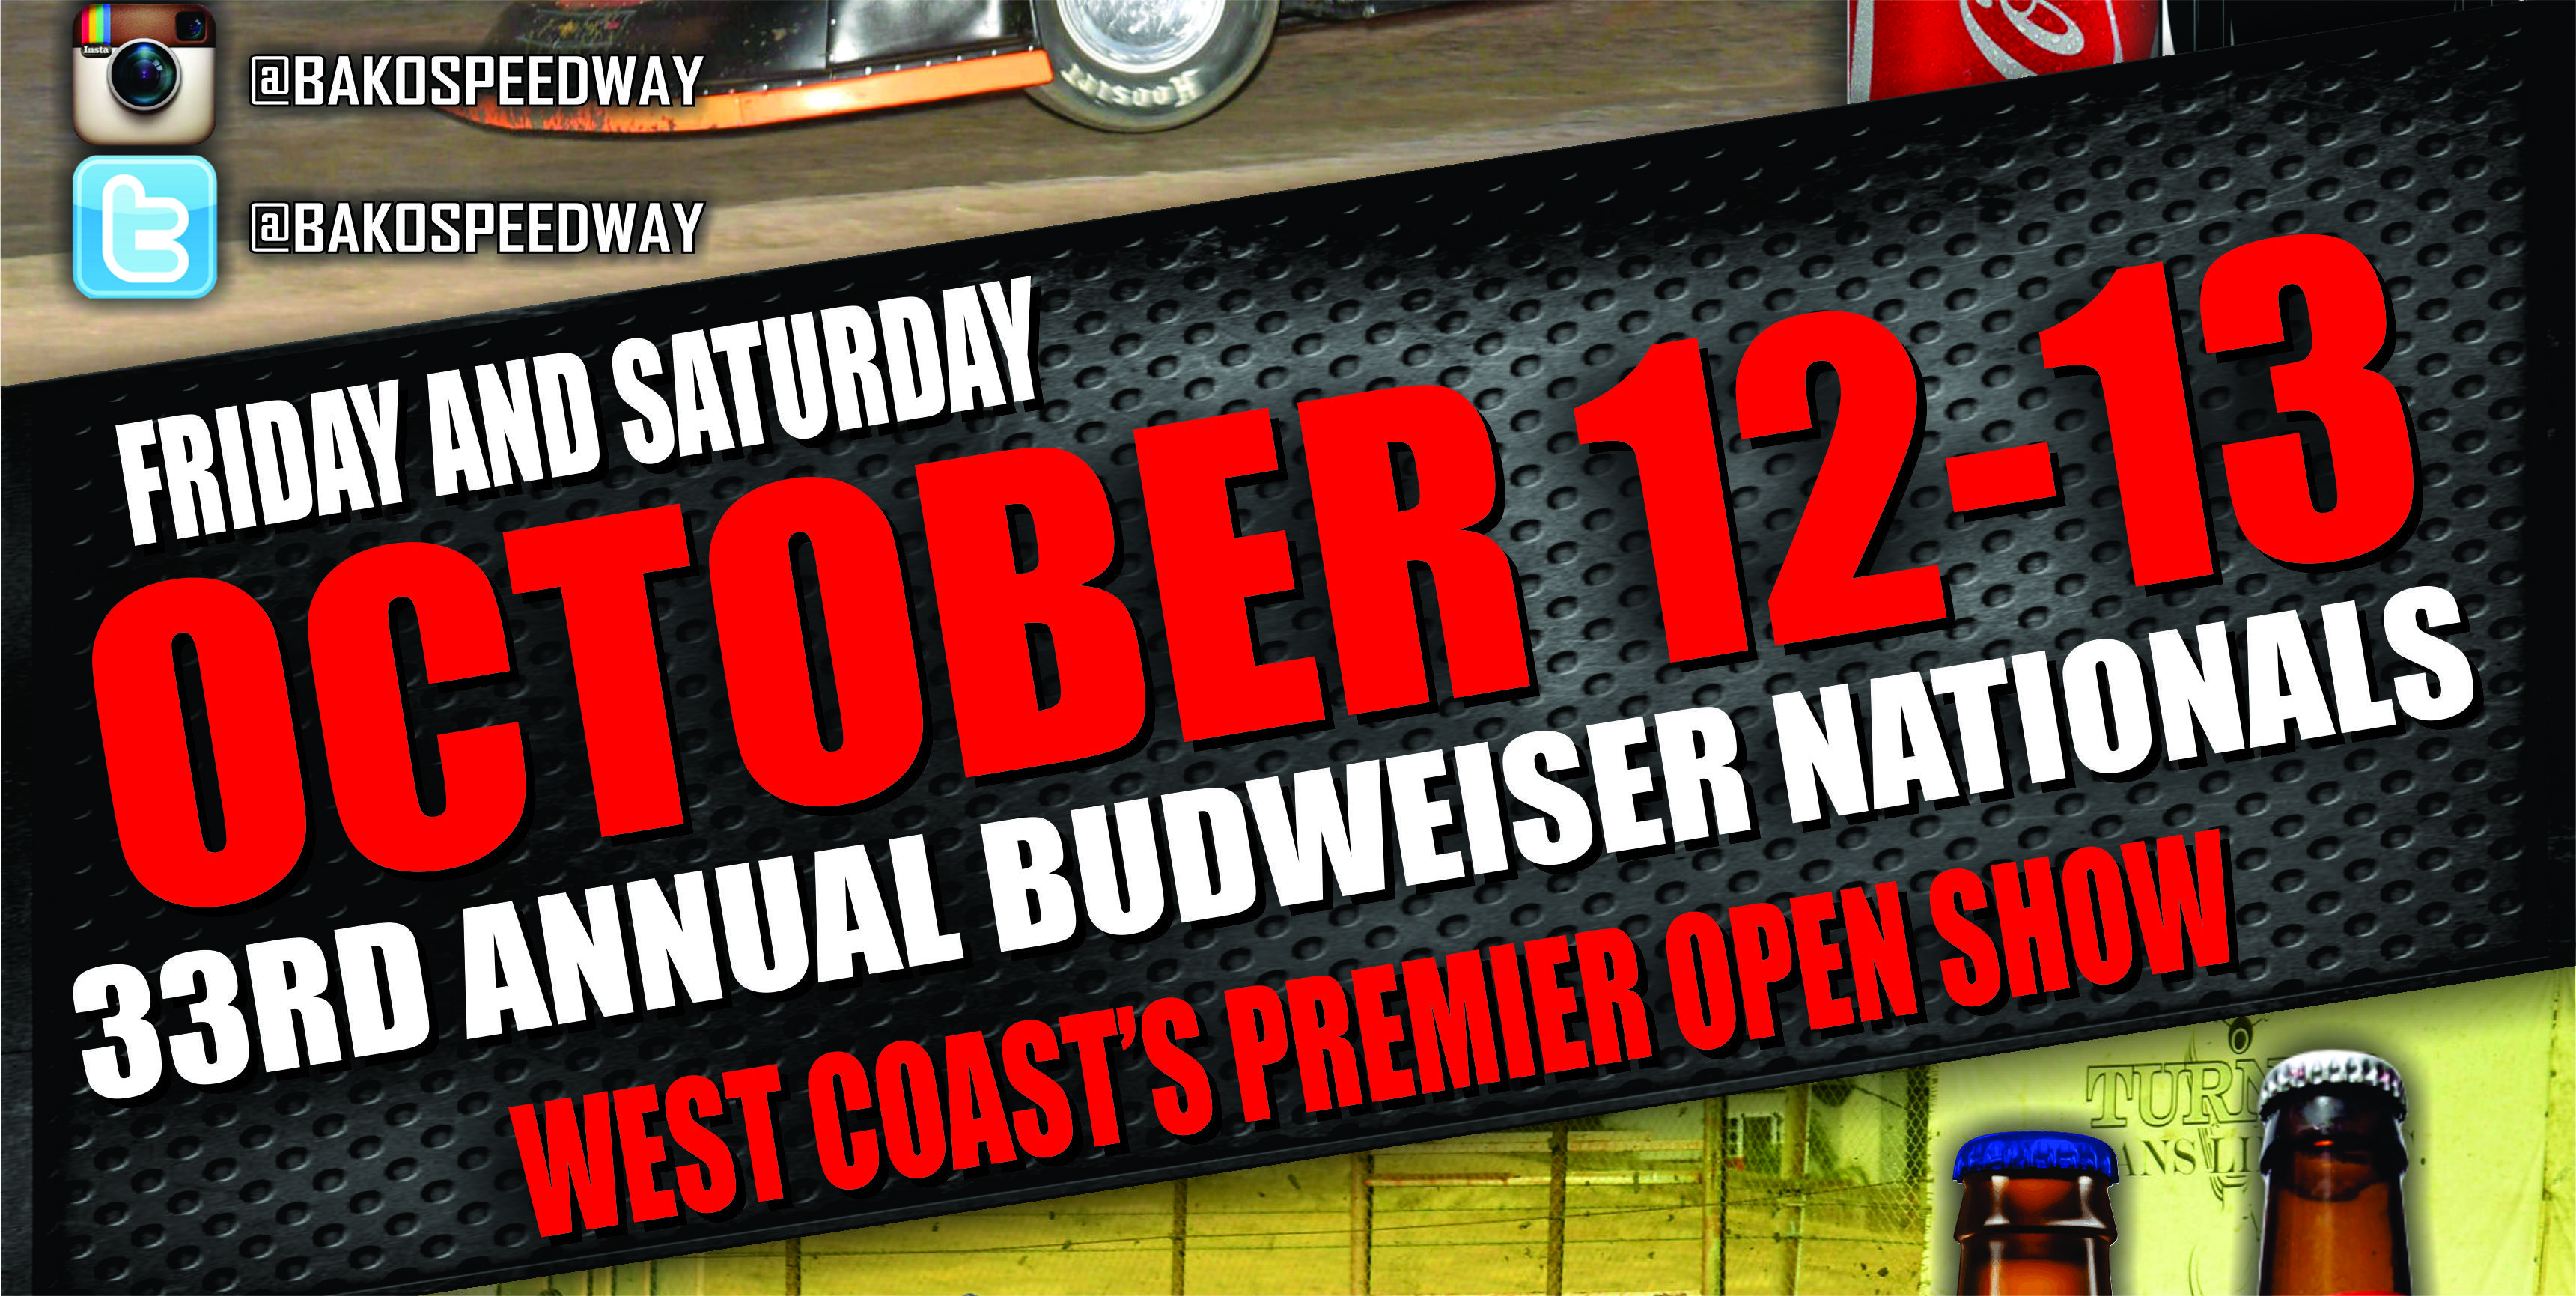 33RD ANNUAL BUDWEISER NATIONALS - LATE MODELS, MODIFIEDS, SPORTMODS, HOBBY STOCKS, AMERICAN STOCKS, MOD LITES